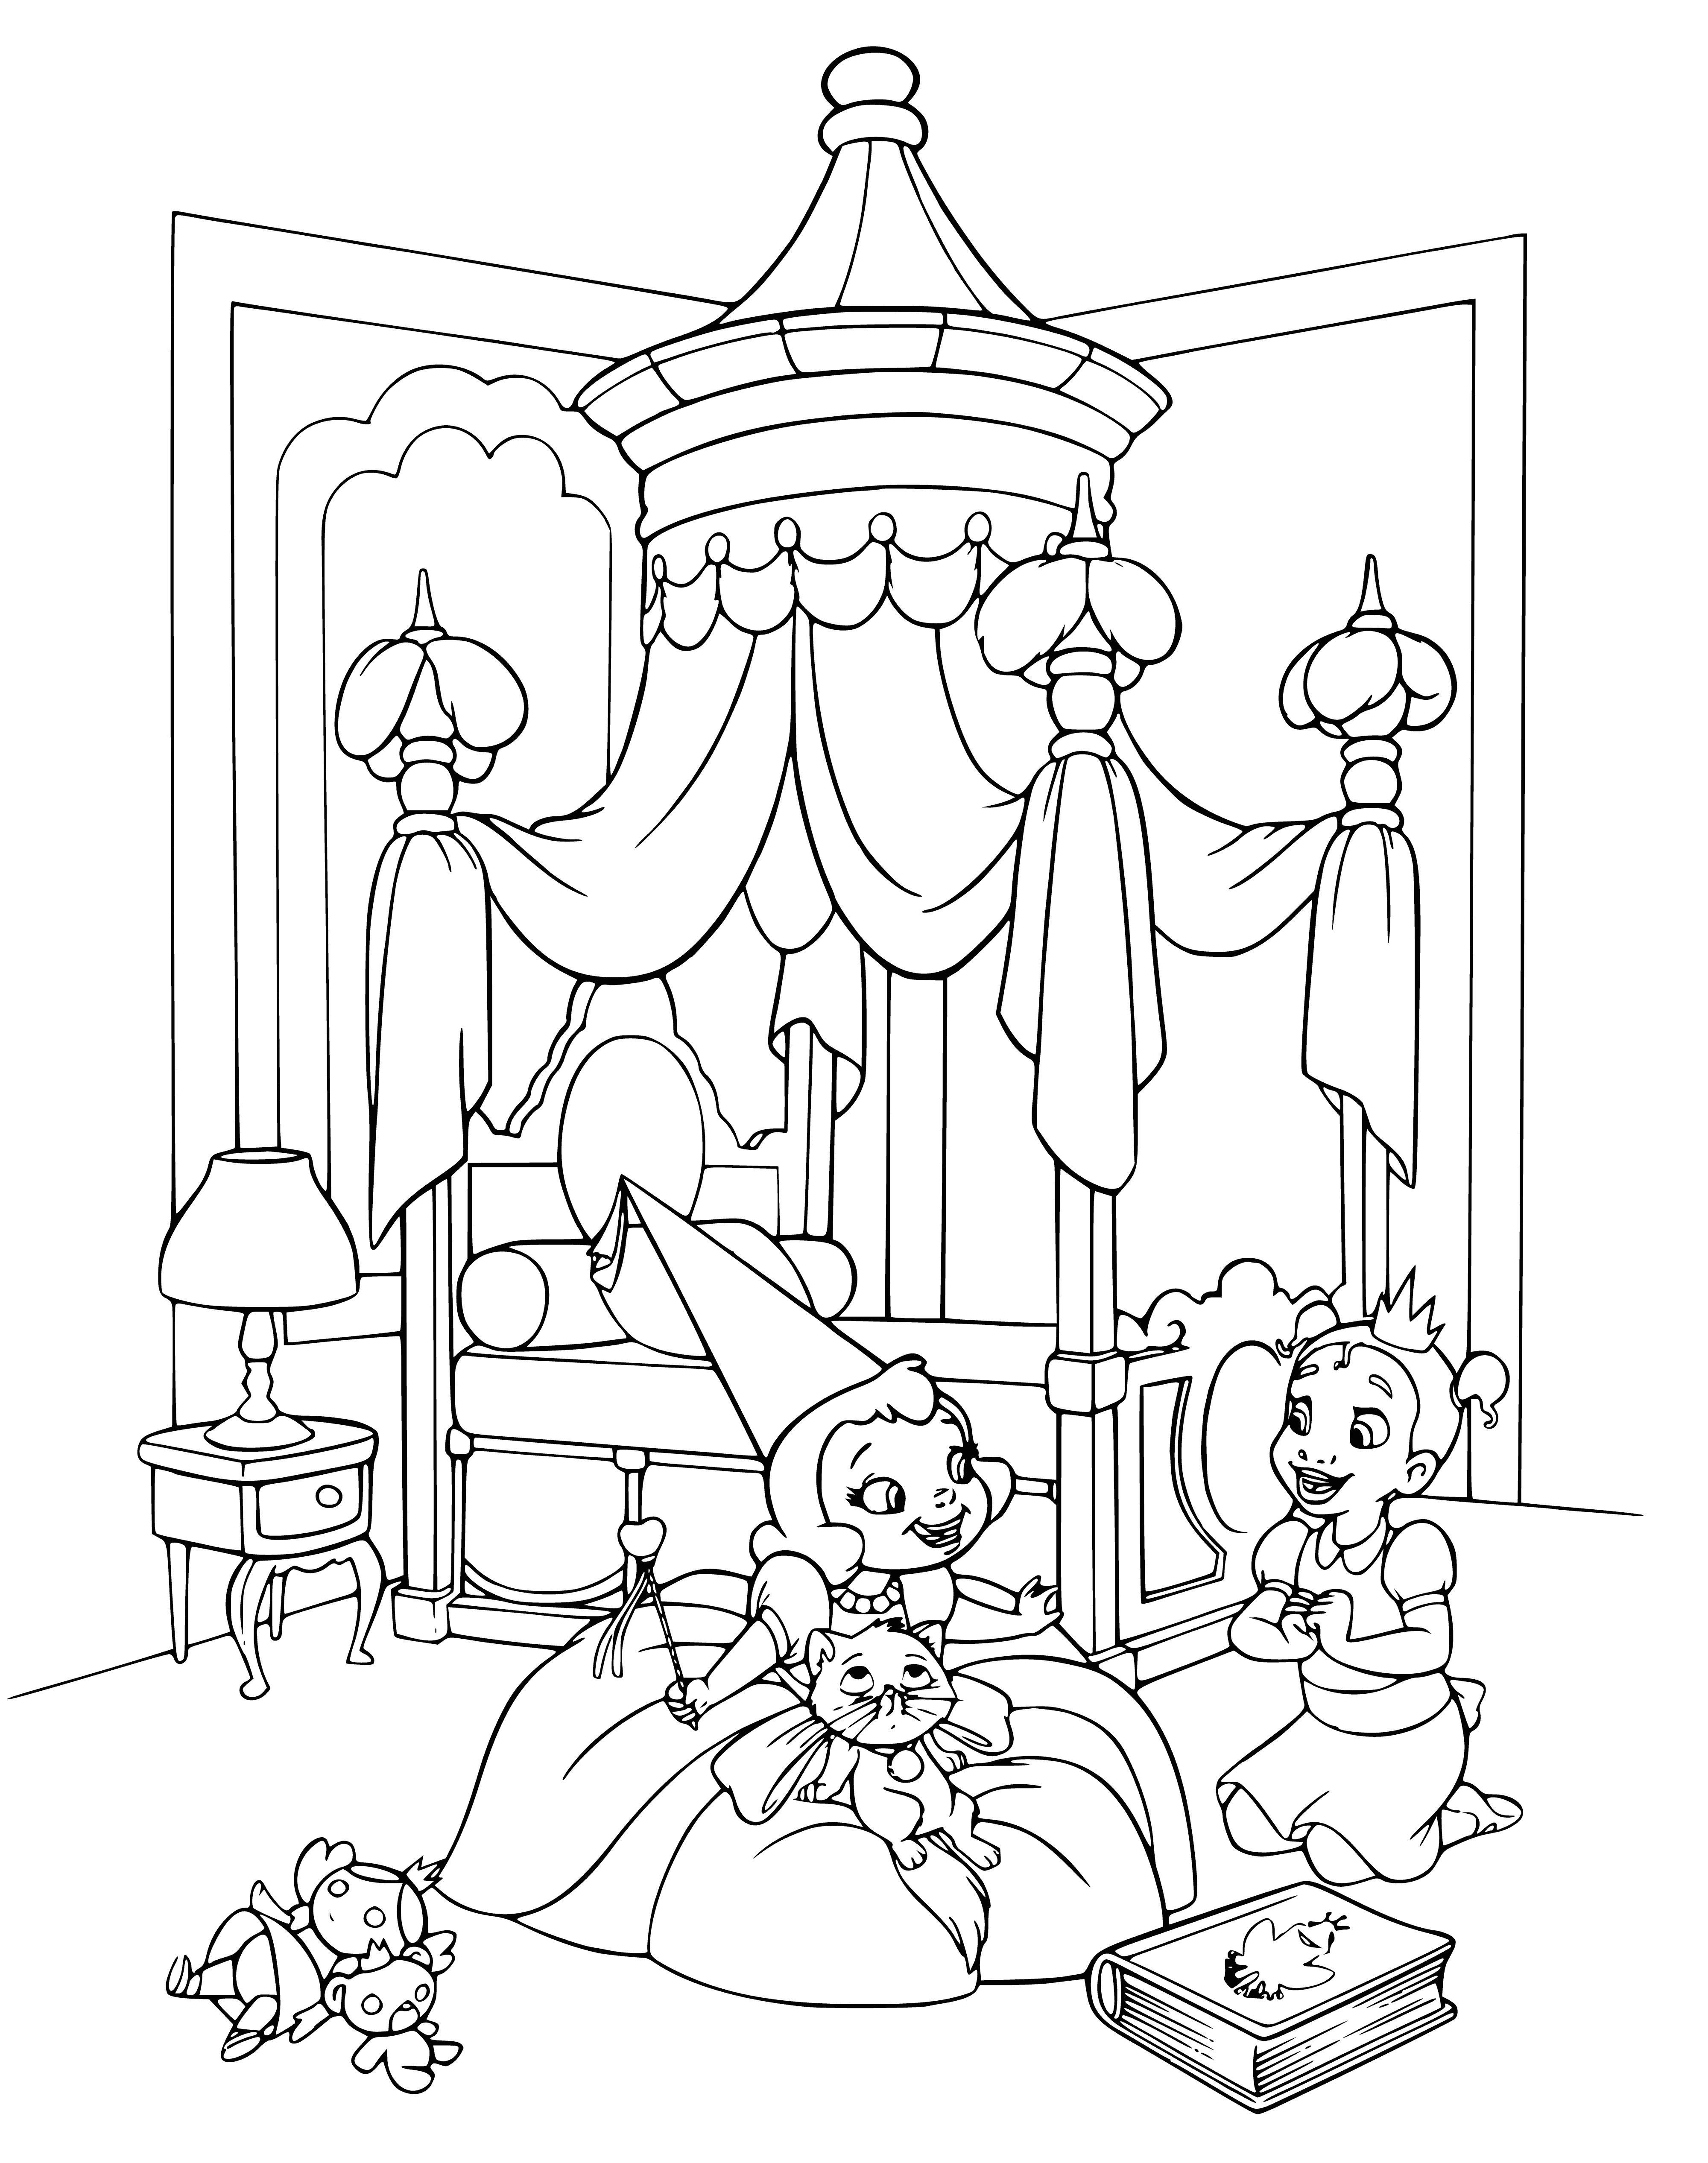 coloring page: A cozy room w/ a four-poster bed, fireplace, armchair, piano, paintings, chandelier, and framed coloring pages. A cozy spot to relax and explore creativity.